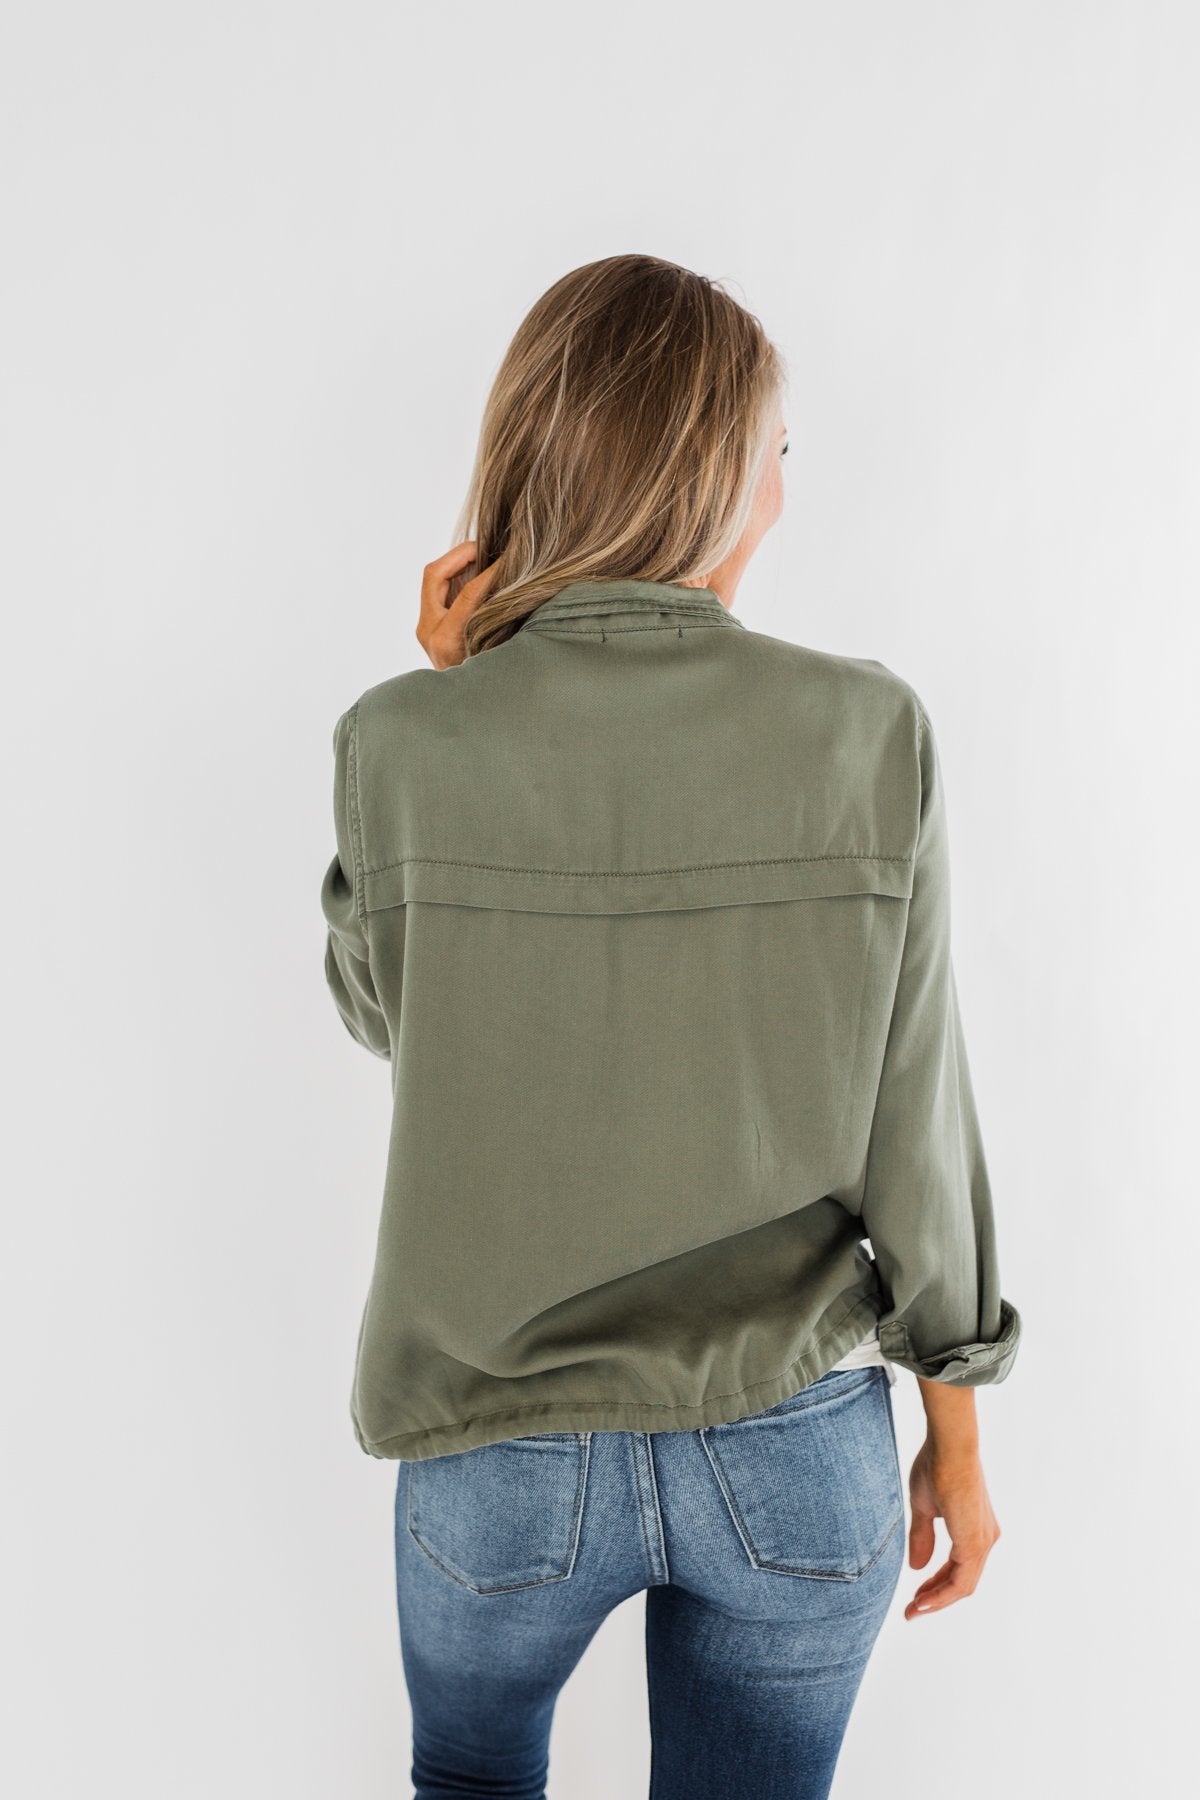 Going Places Lightweight Drawstring Jacket- Olive